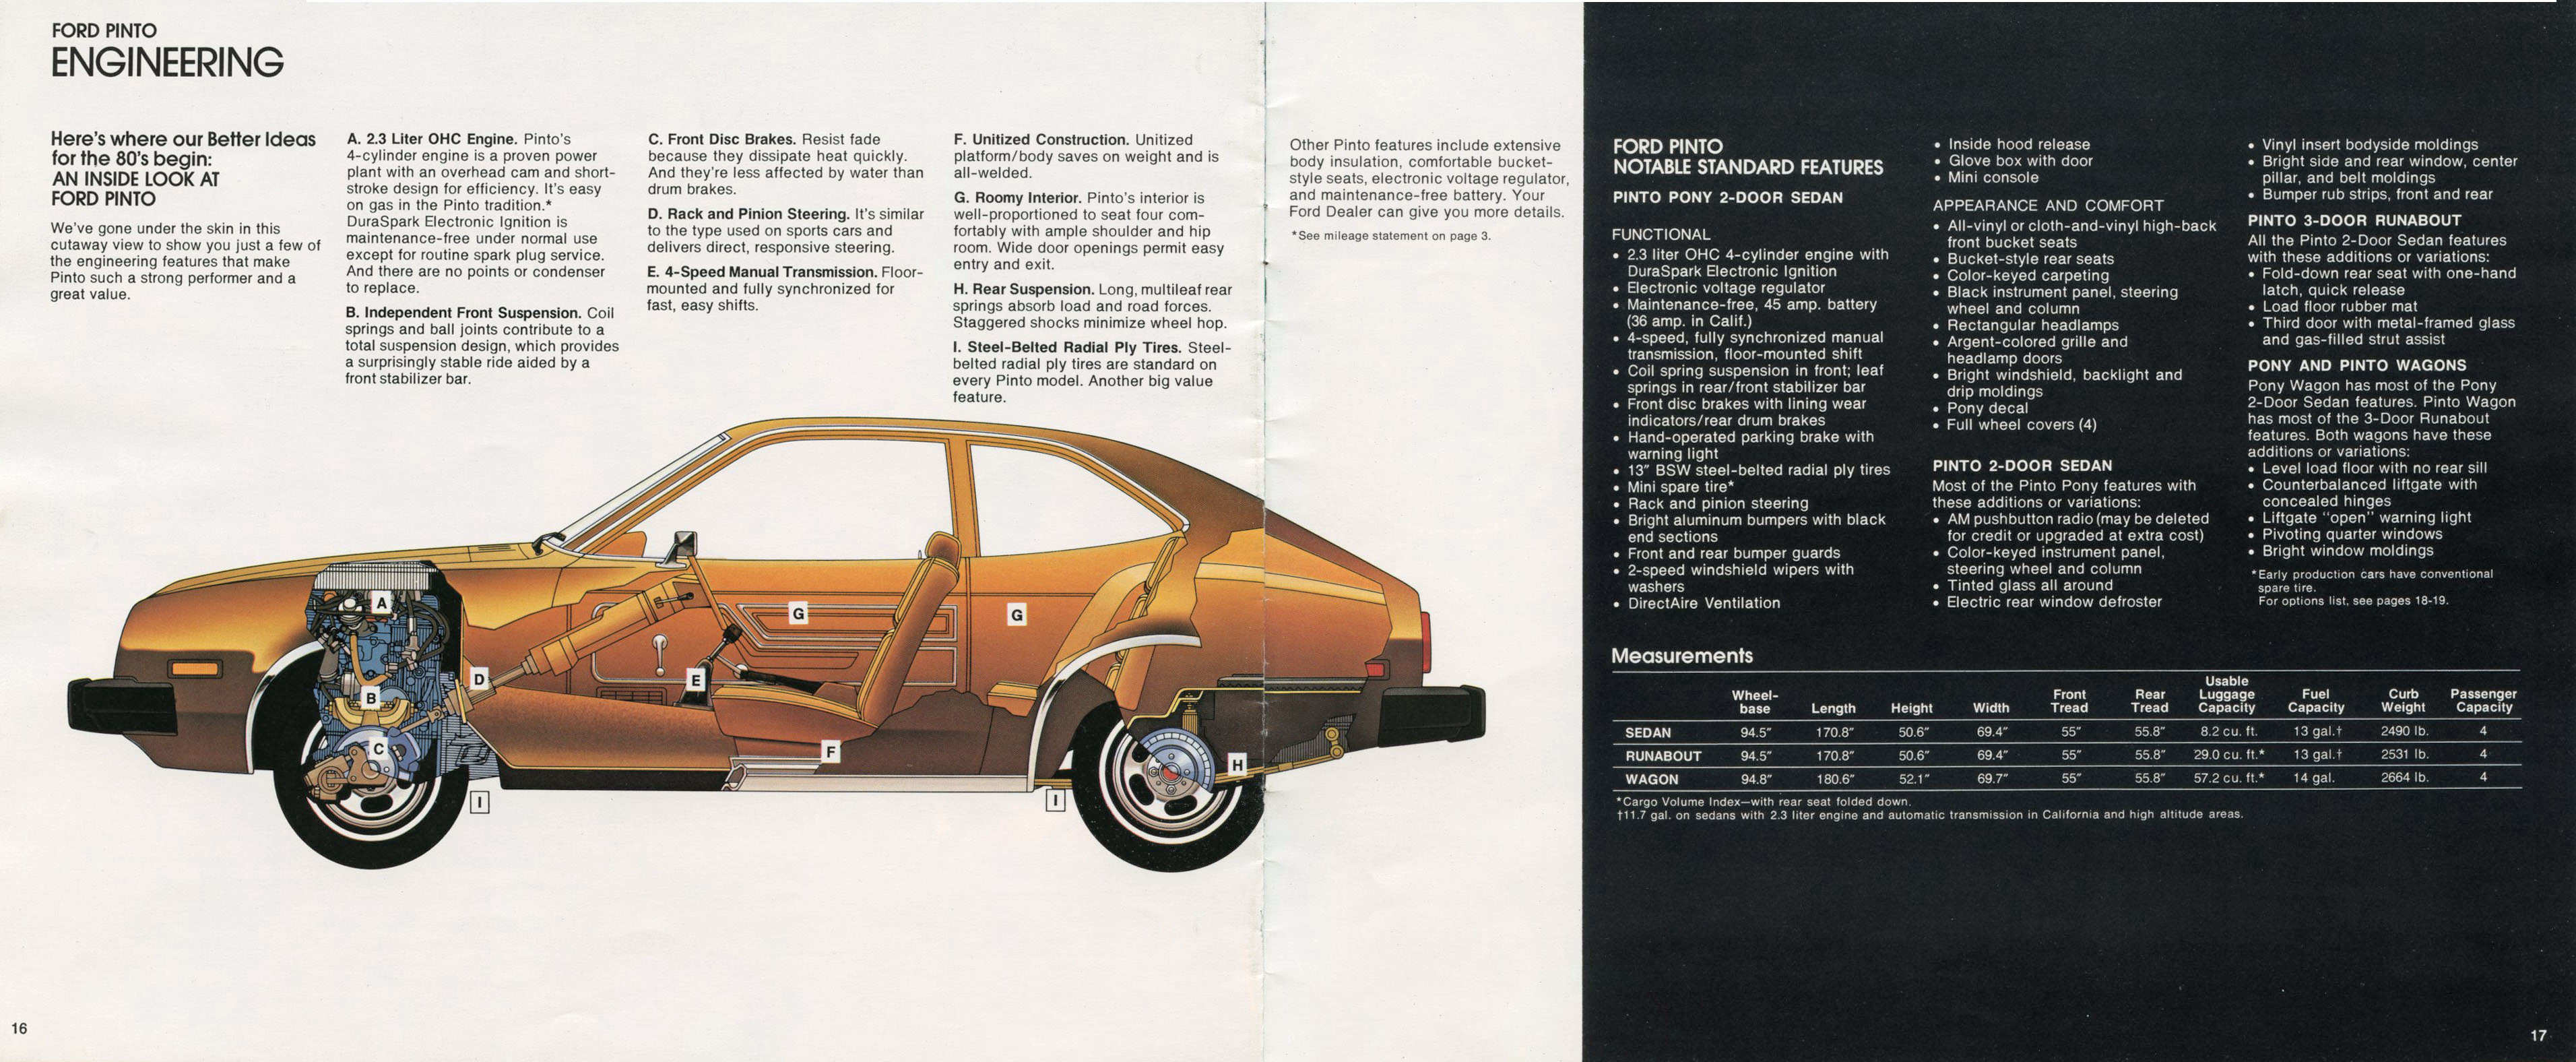 1980_Ford_Pinto-16-17